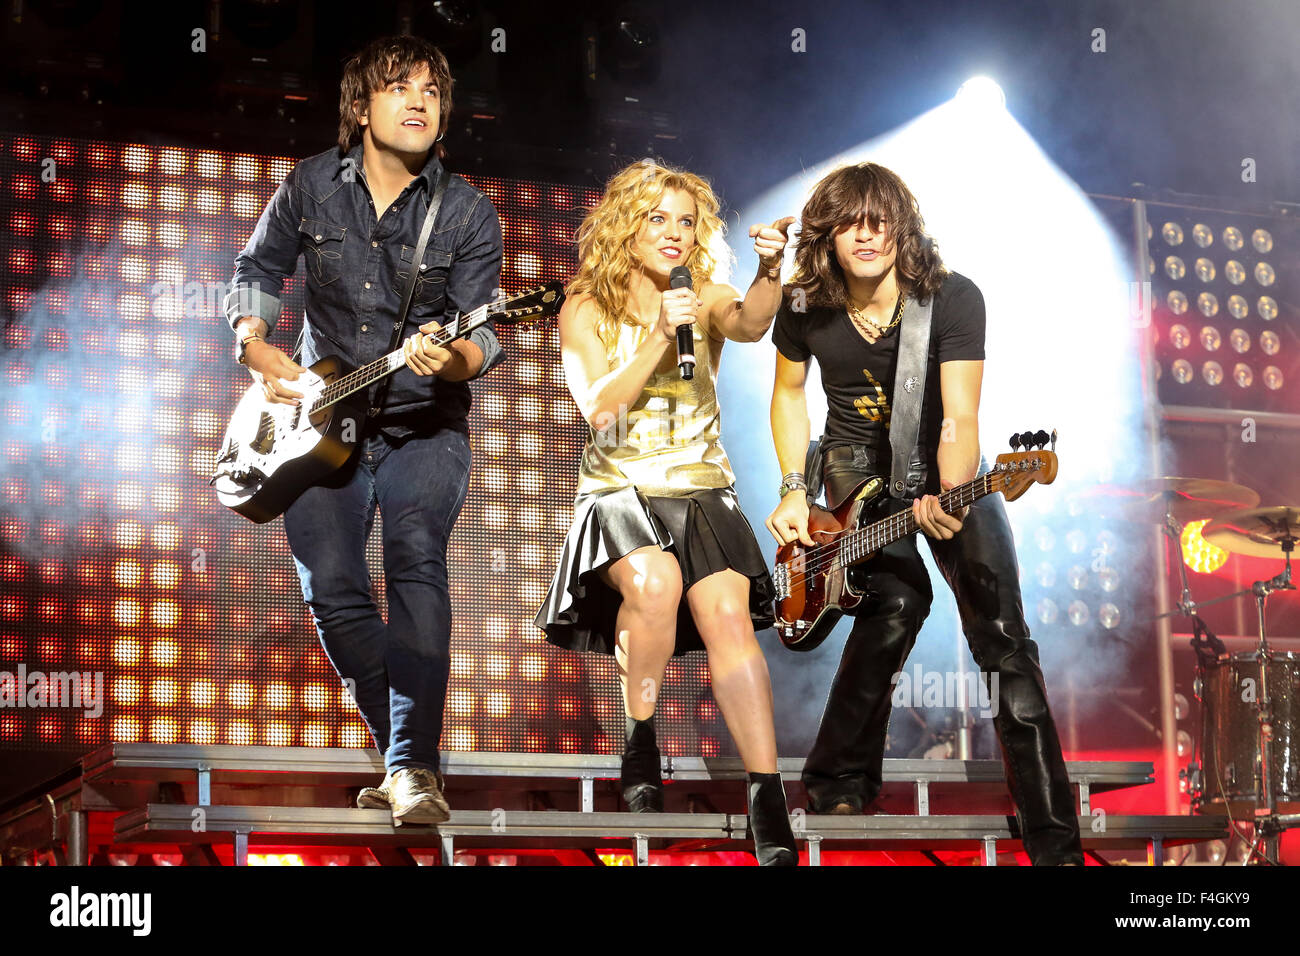 Music artist THE BAND PERRY bring their 2013 Summer Tour to Walnut Creek in Raleigh, NC.  The Band Perry, an American country music group, is composed of siblings Kimberly Perry (lead vocals, guitar, piano), Reid Perry (bass guitar, background vocals), and Neil Perry (mandolin, drums, accordion, background vocals). Stock Photo